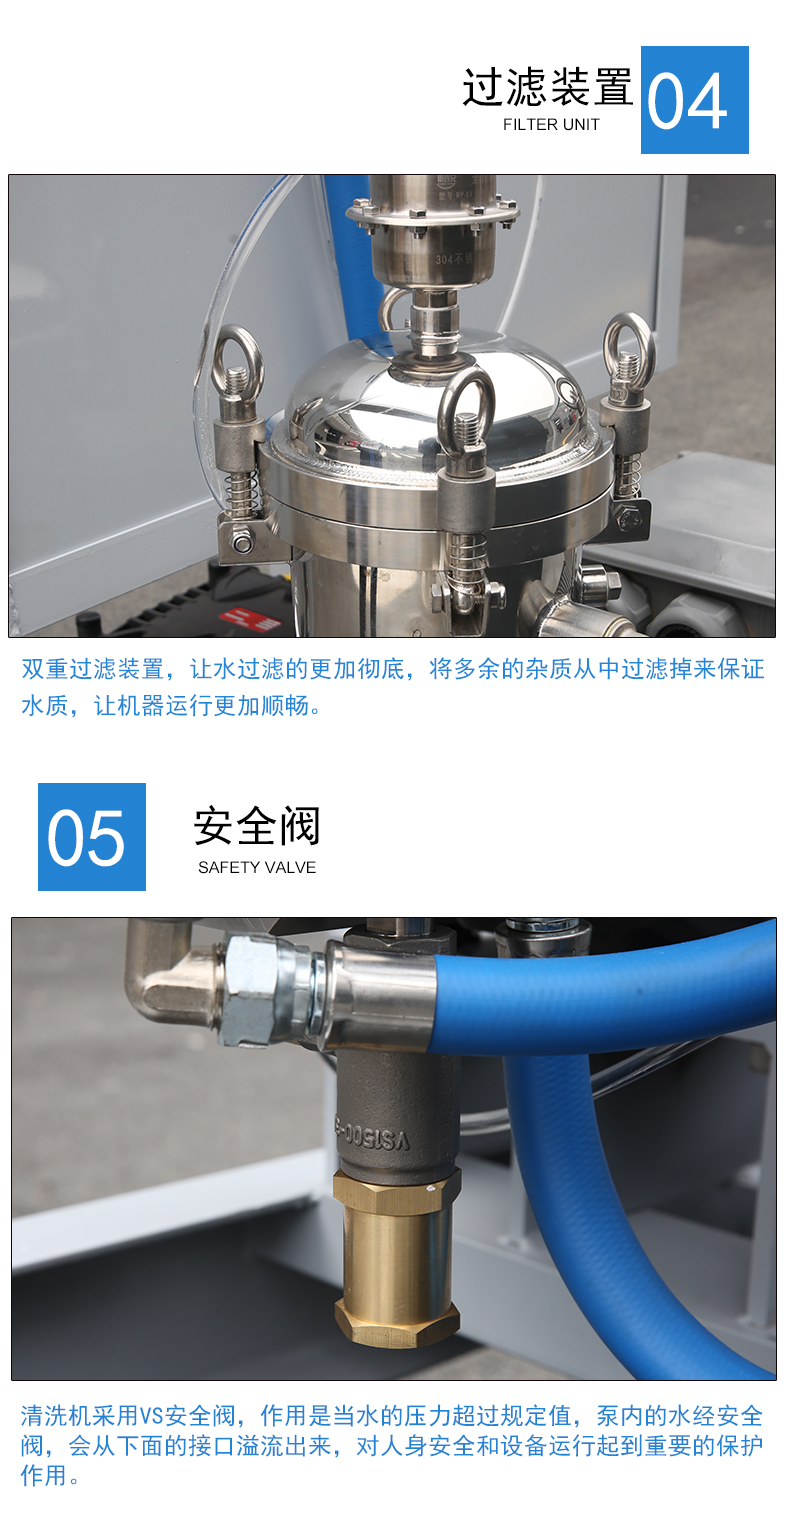 Maiji MIGIK MK20150E Ultra High Pressure Cleaning Machine for Ship Shell Rust Removal and Marine Biological Cleaning